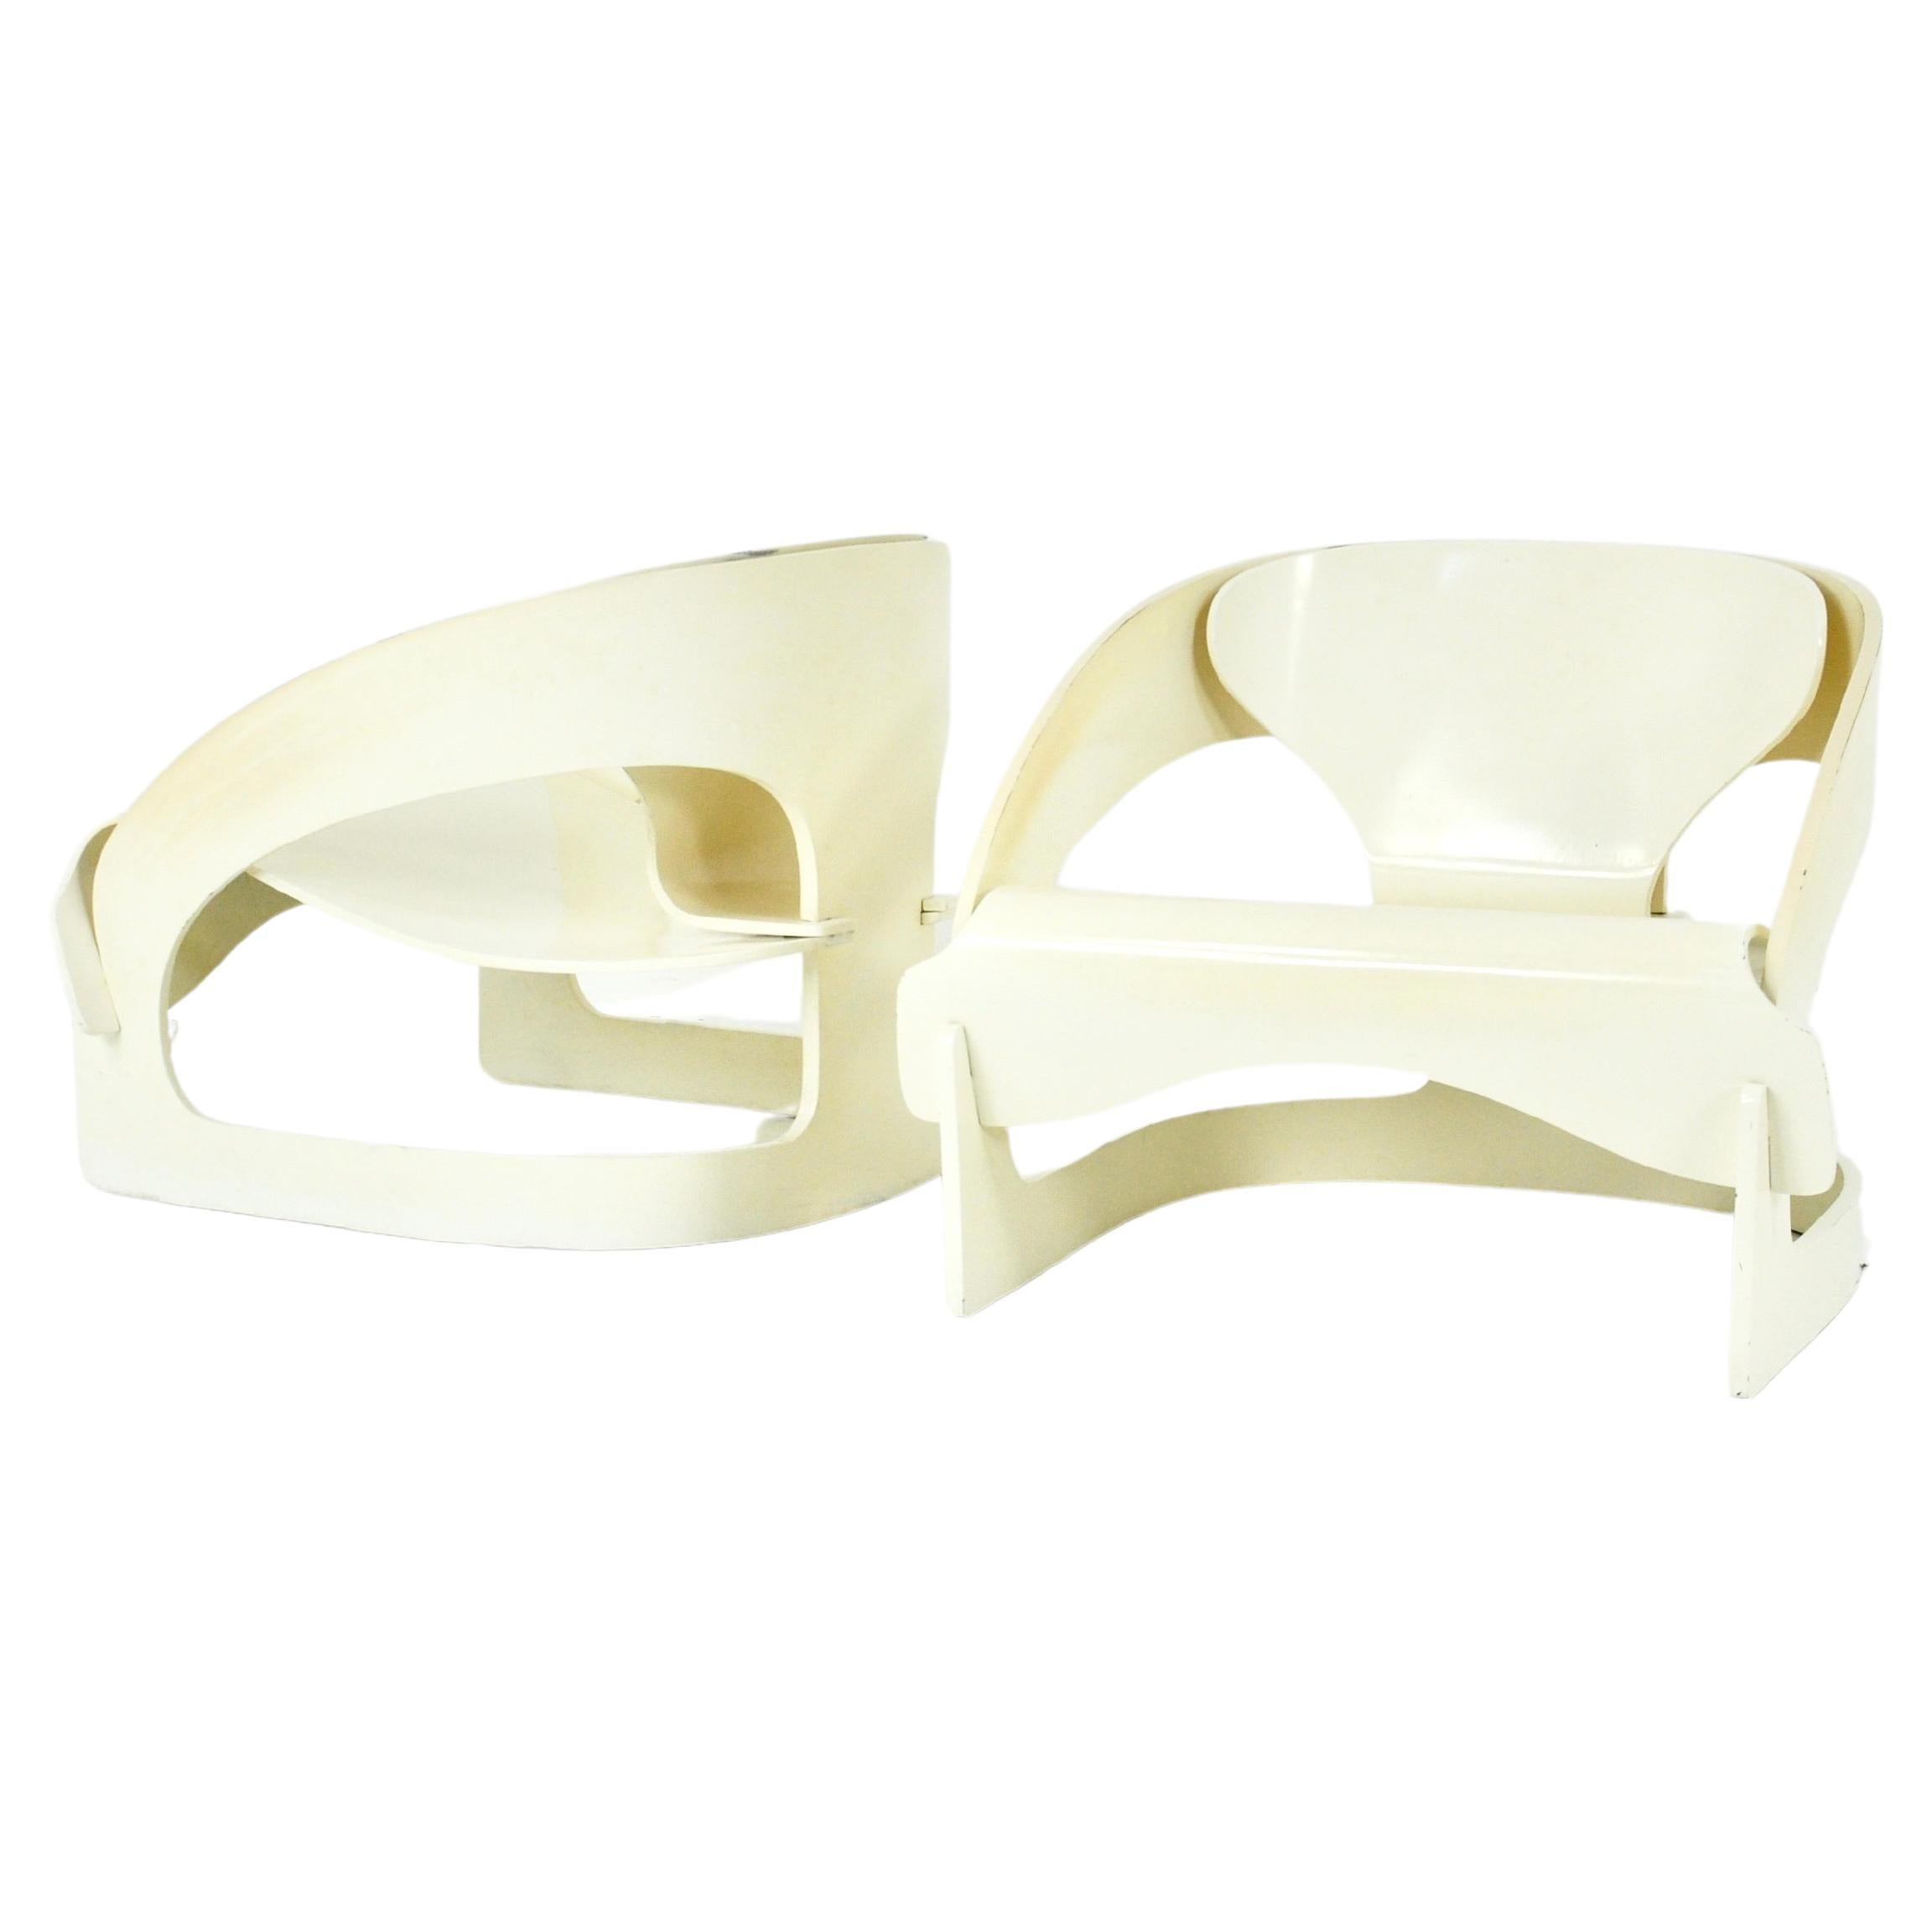 Model 4801 Armchairs by Joe Colombo for Kartell, 1960s, set of 2 For Sale